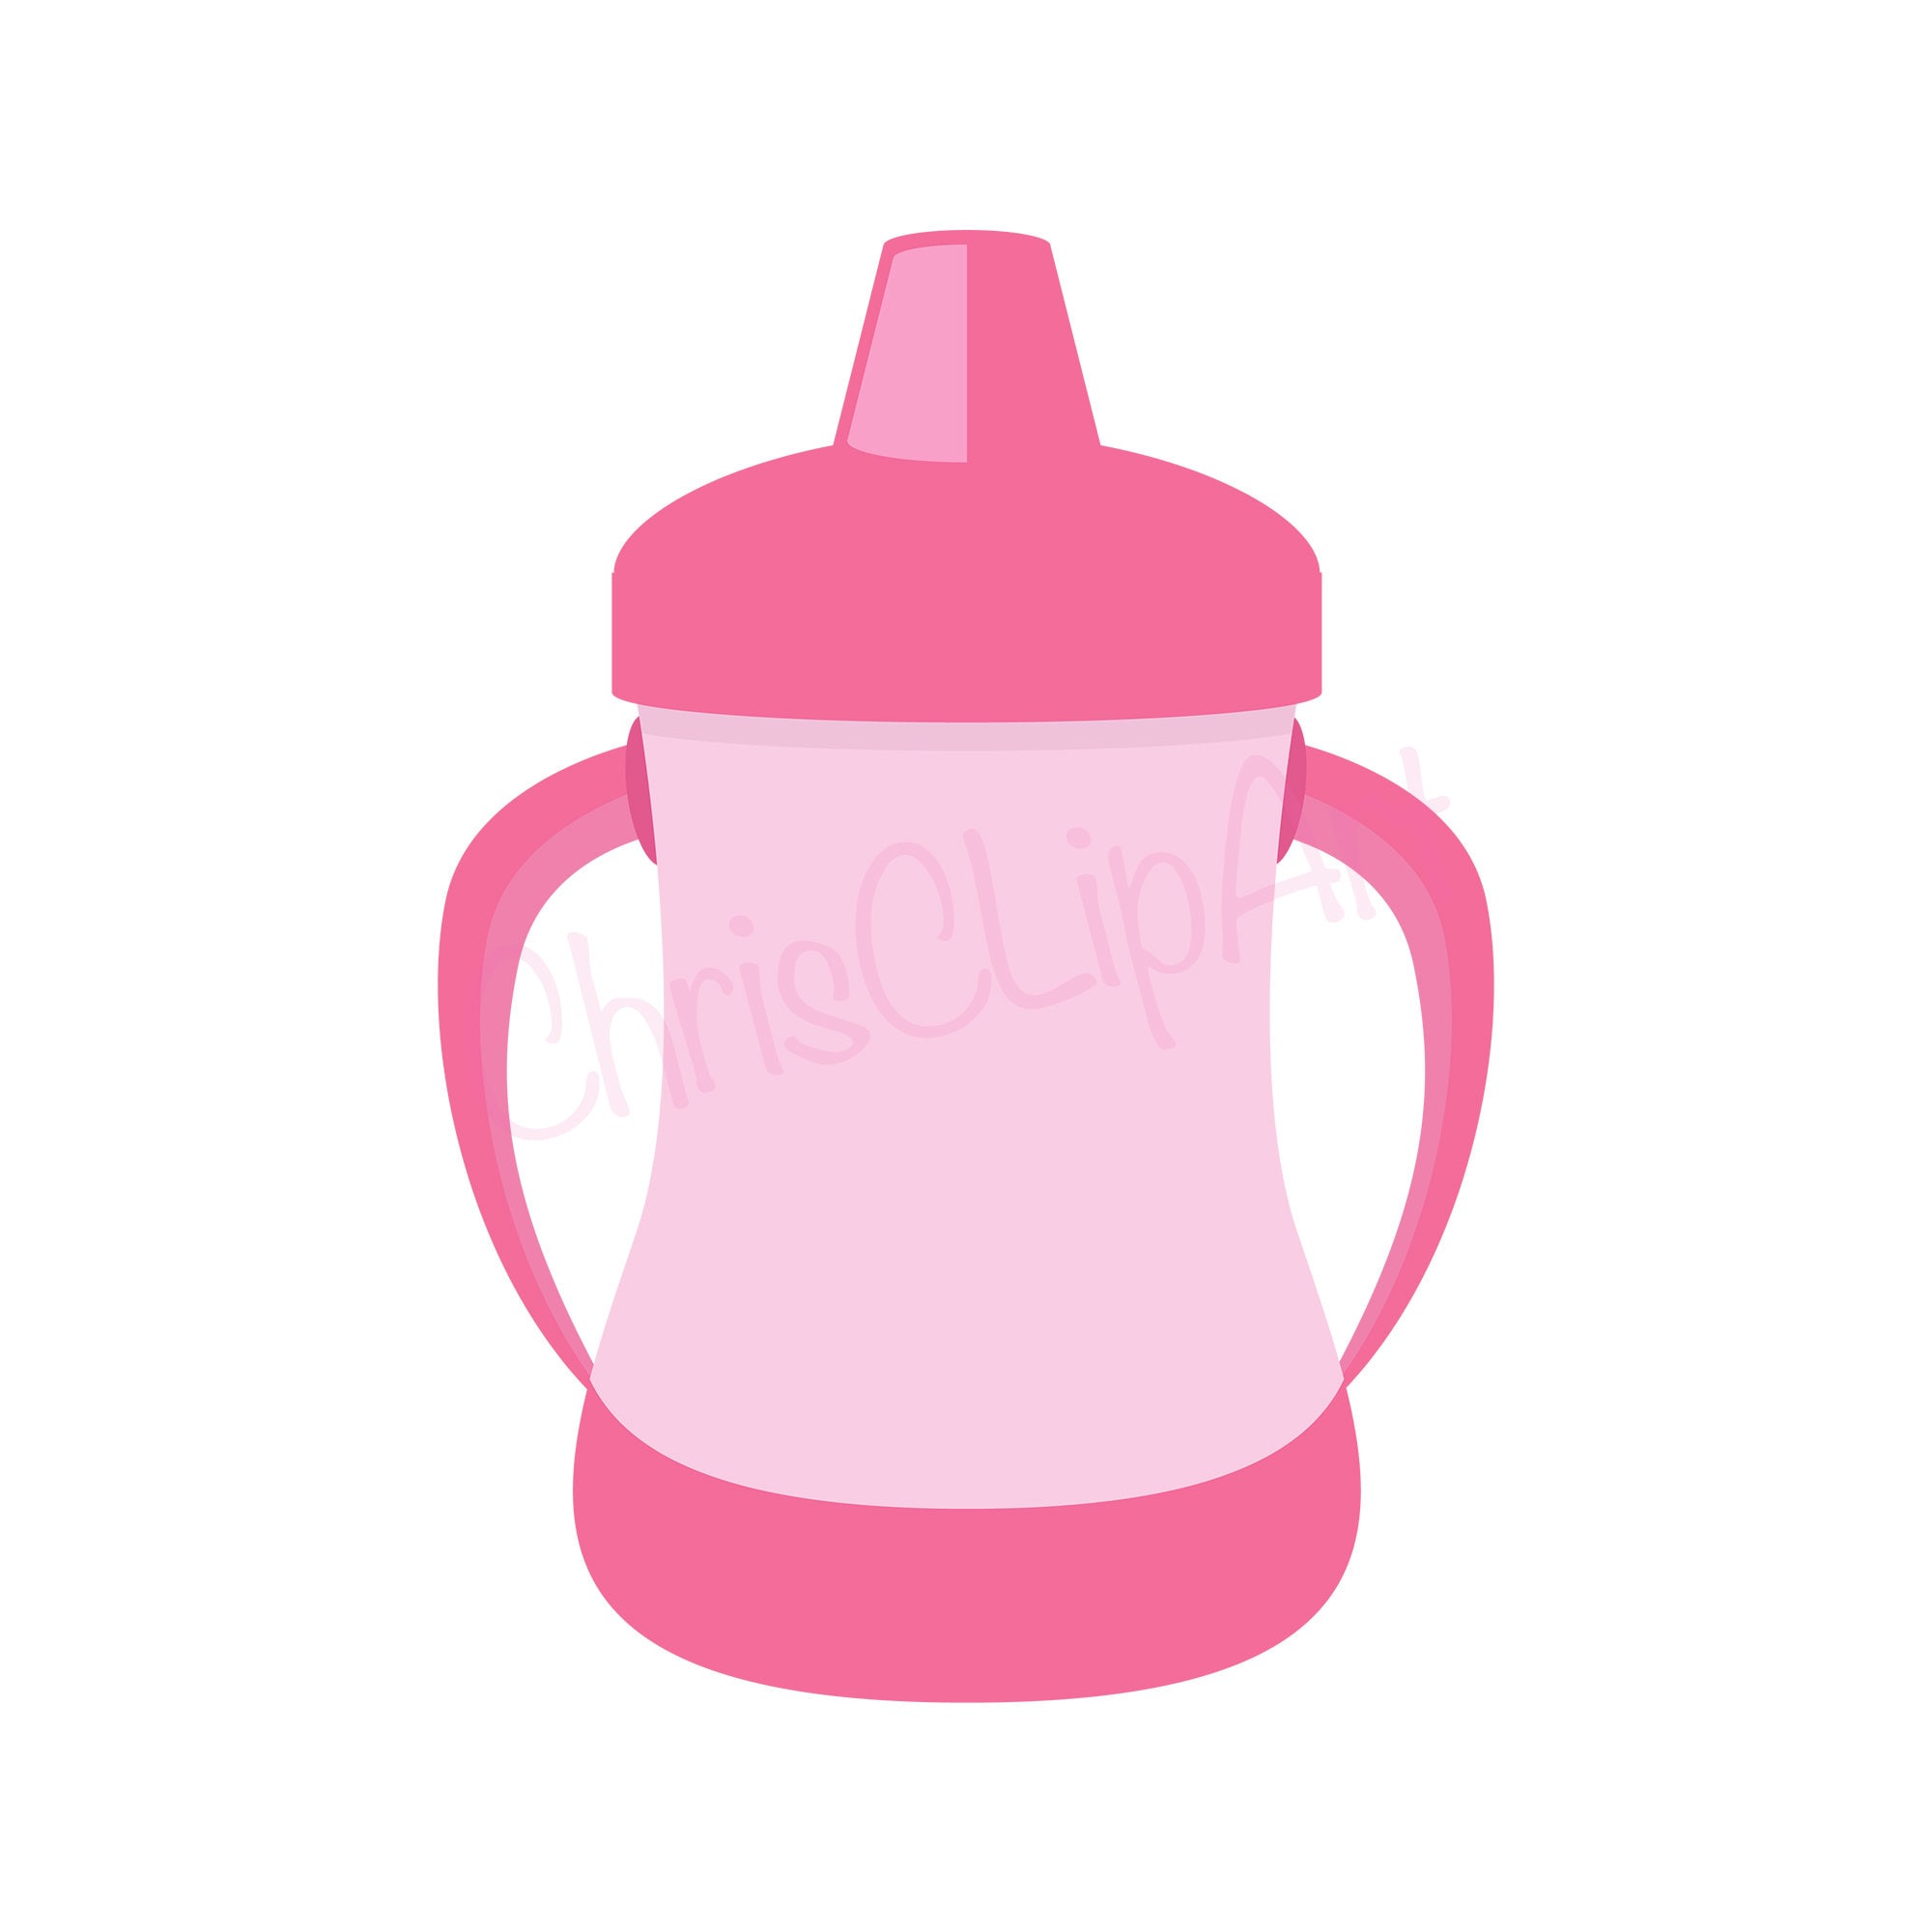 Sippy Cup Svg, Clipart Sippy Cup, Sippy Cup Png, Cricut Sippy Cup, Baby  Clipart, Baby Graphics, Baby Vector, Baby Cup Svg, Clipart Baby Cup  (Instant Download) 